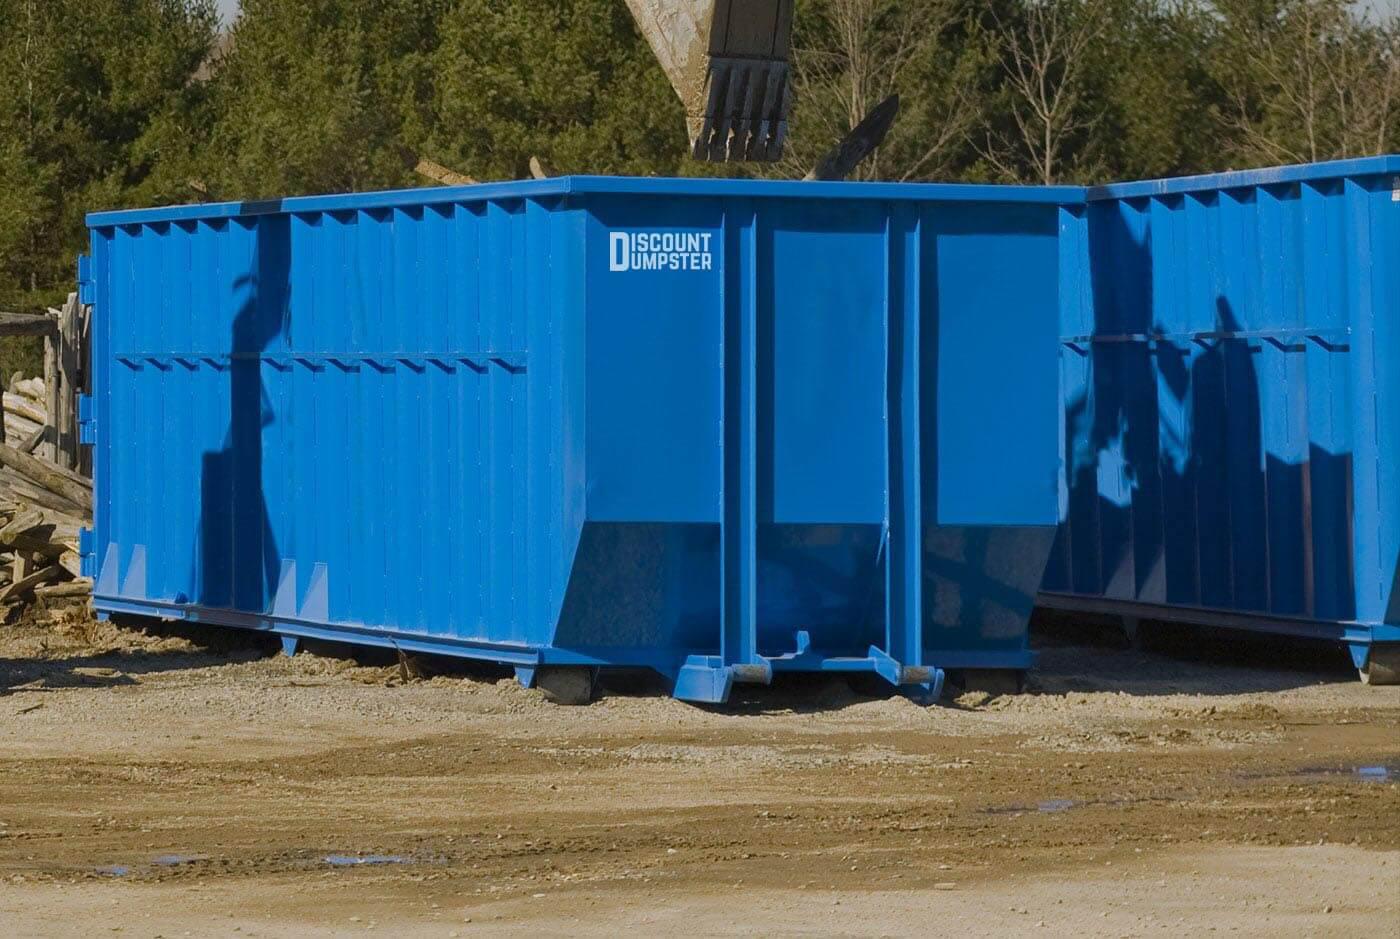 Discount dumpster has roll off dumpsters in the chicago area Discount Dumpster Chicago (312)549-9198